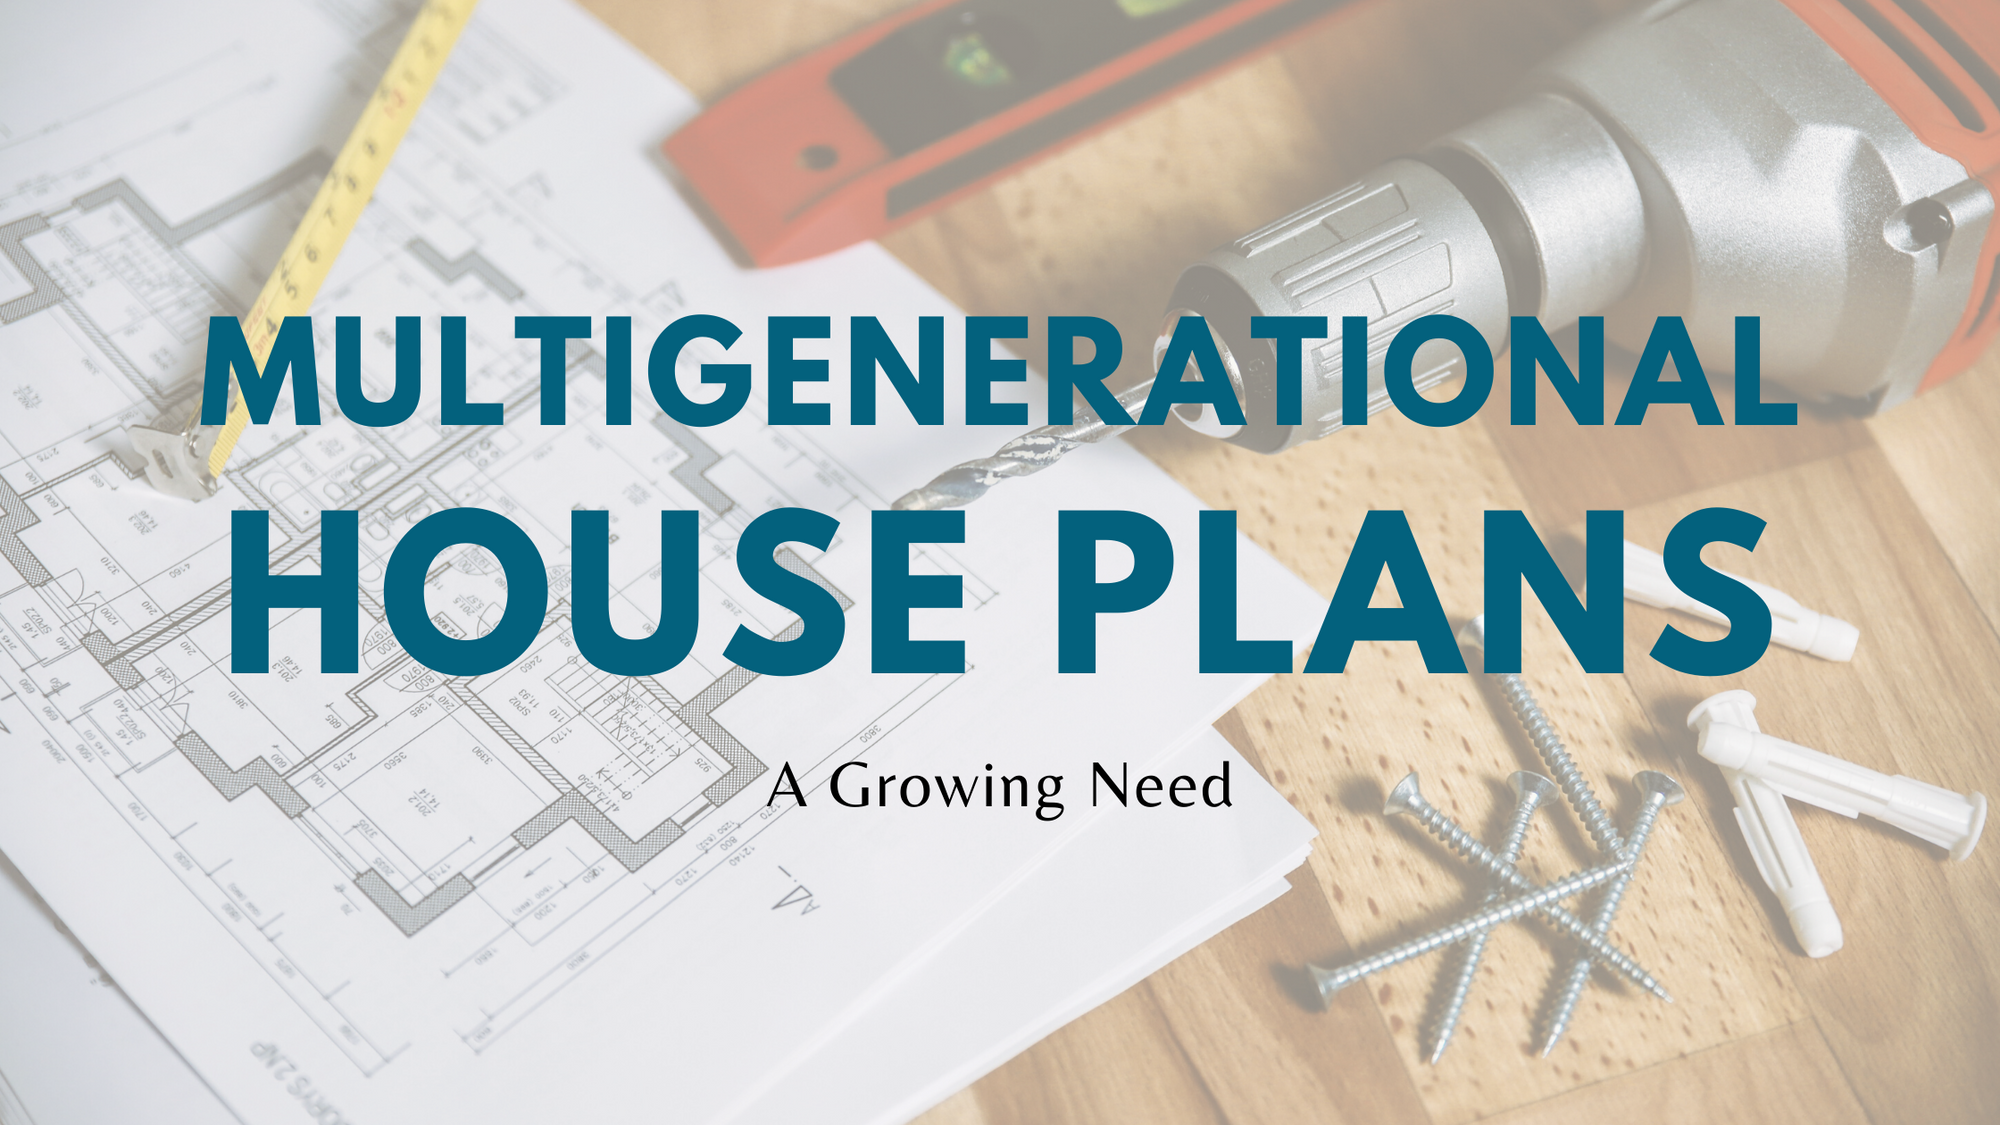 Multigenerational House Plans: A Growing Need